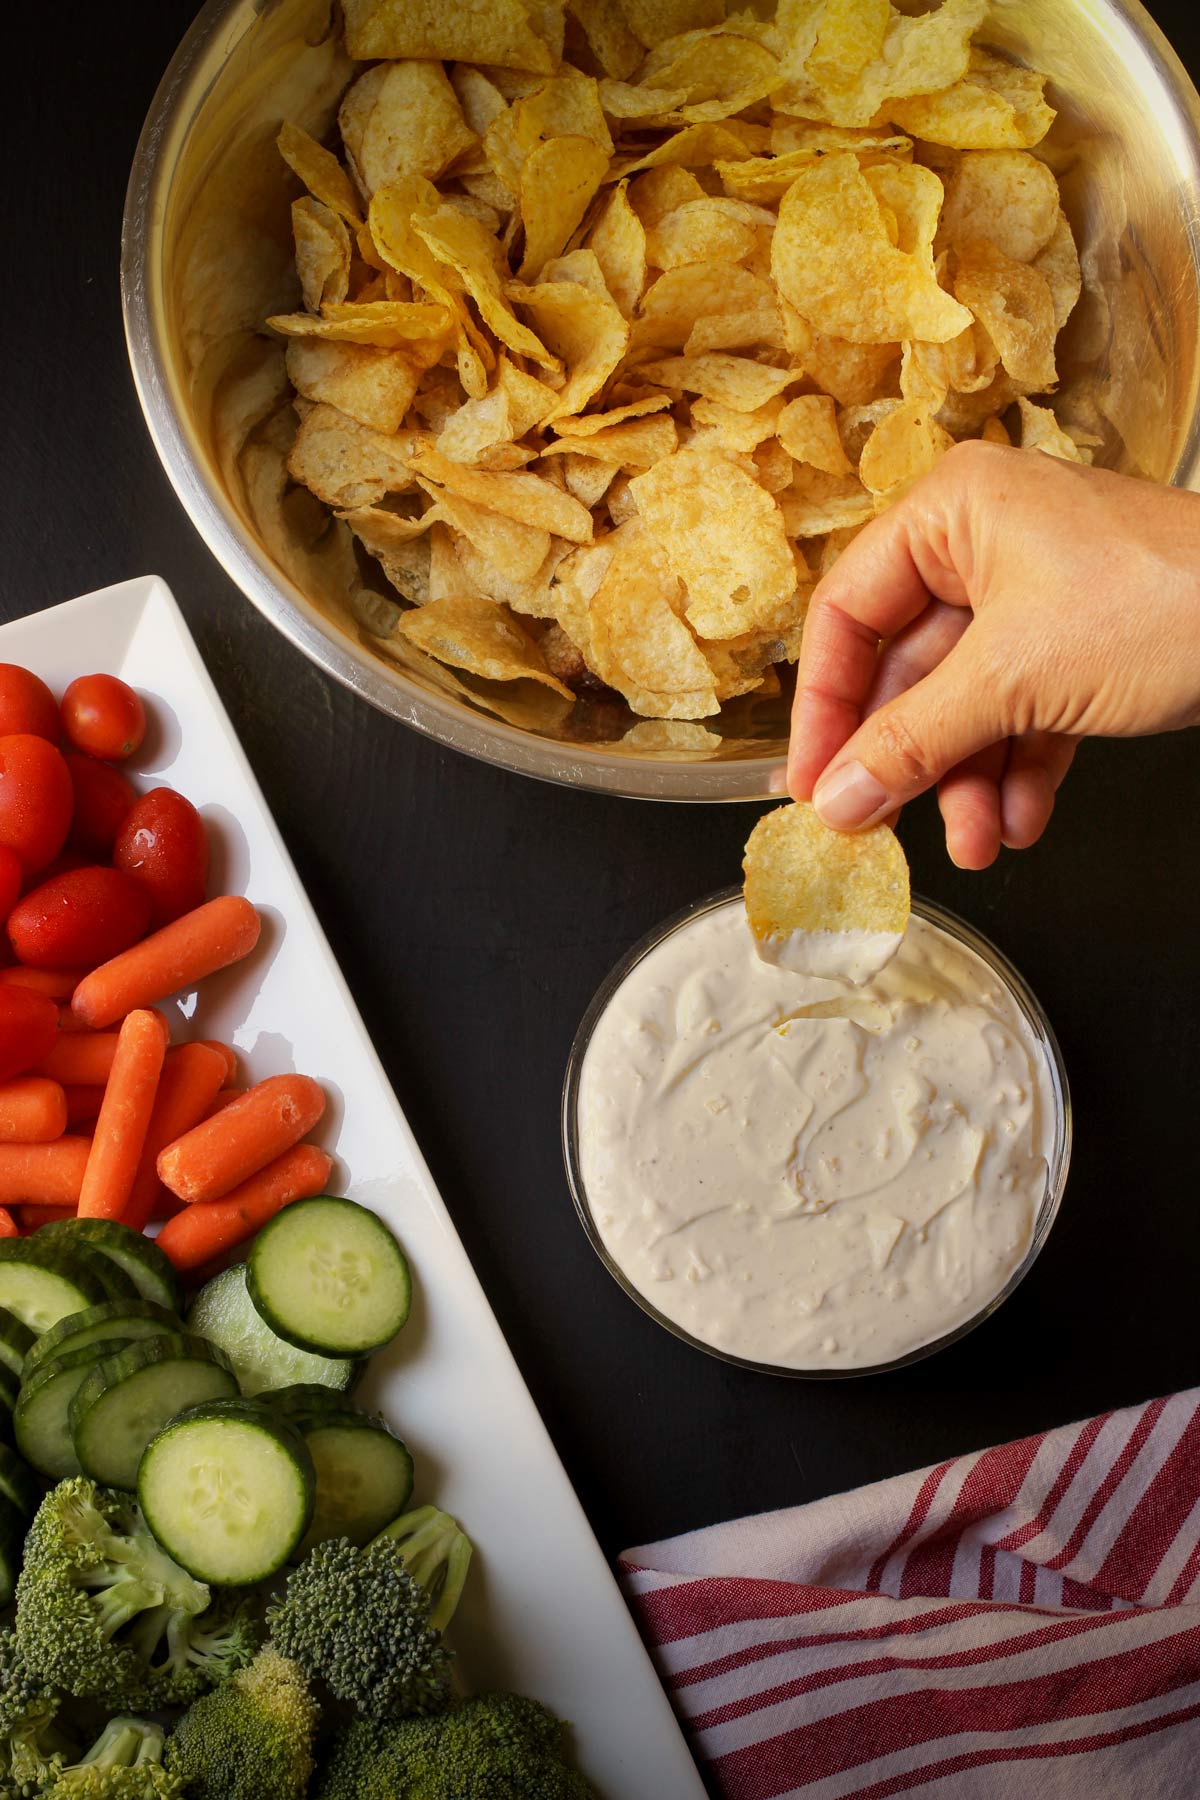 hand dipping potato chip into sour cream and onion dip.